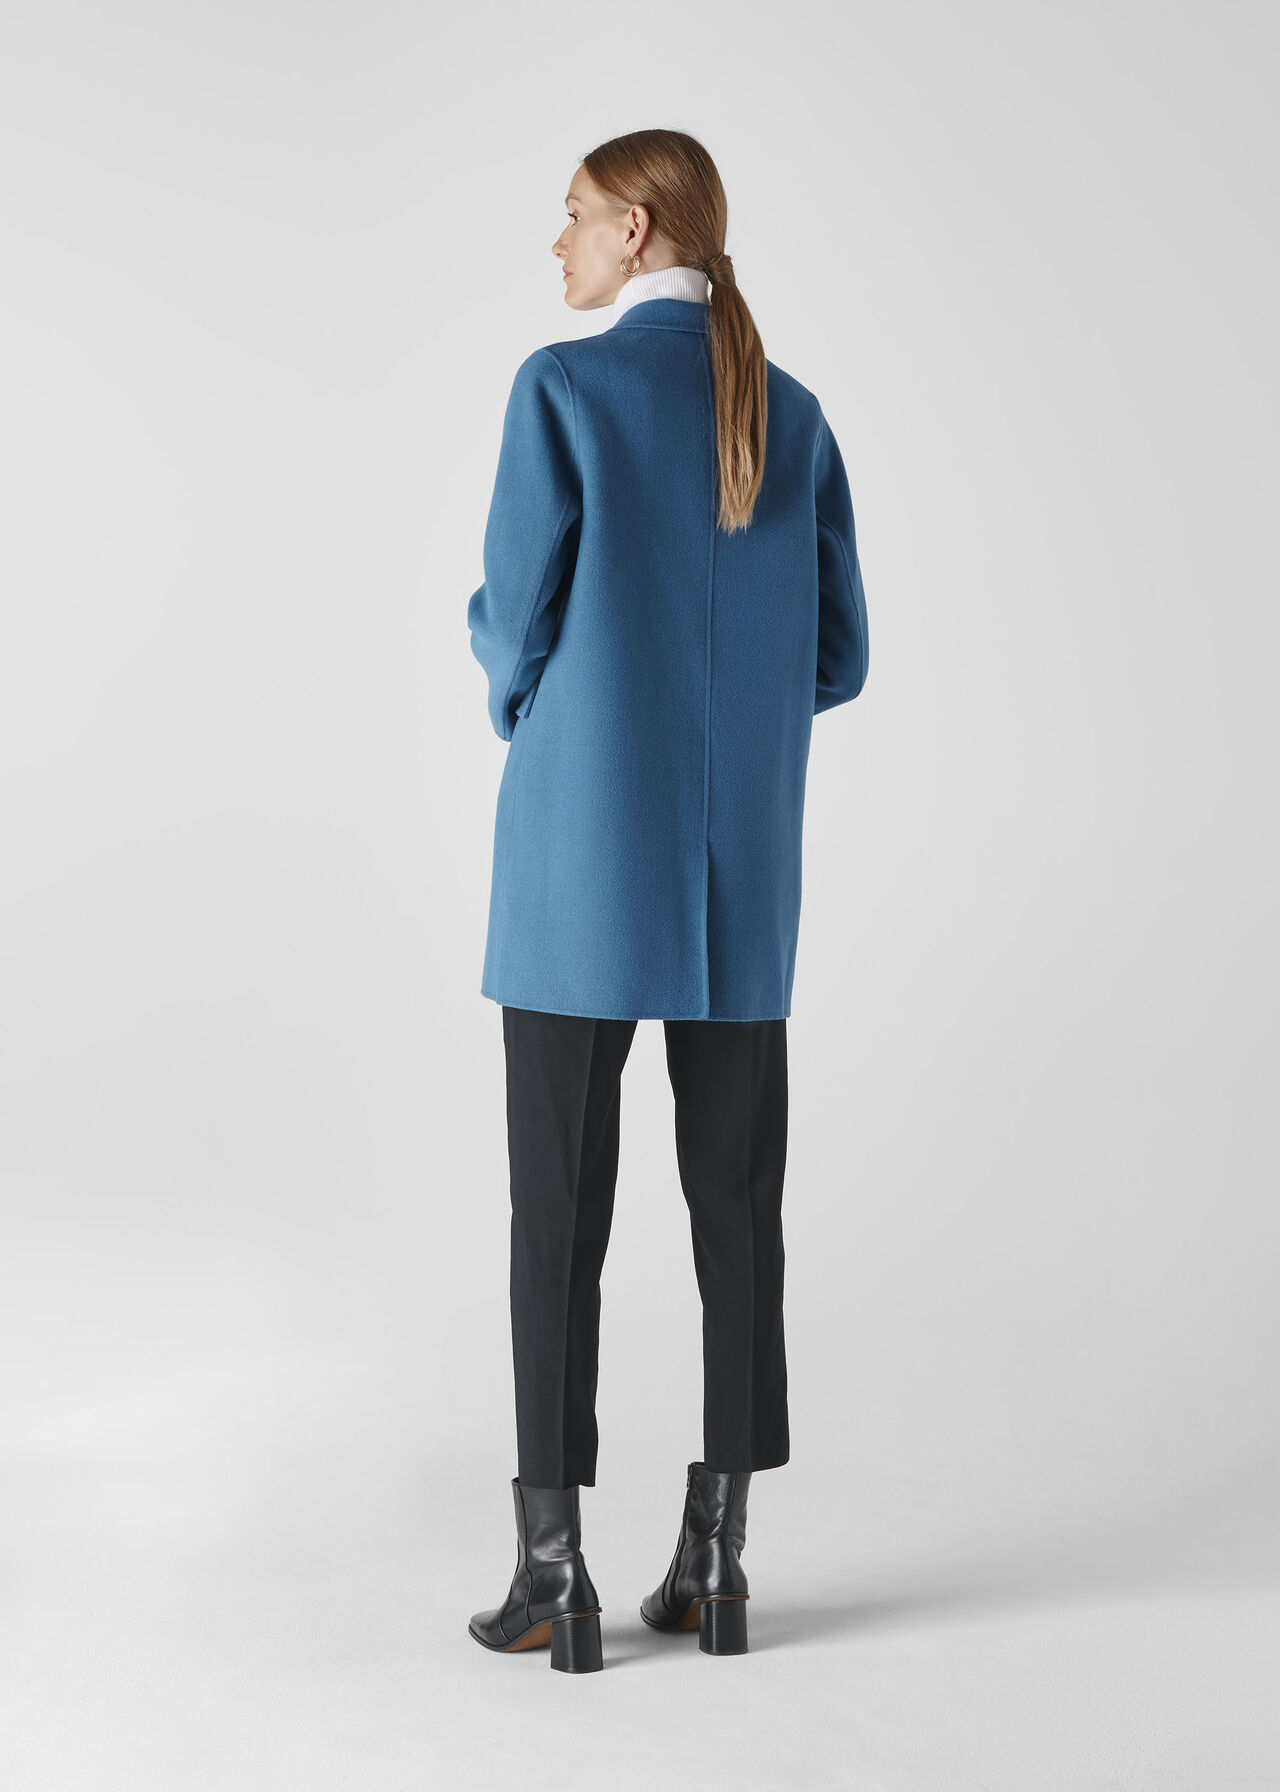 Blue Double Faced Wool Coat | WHISTLES